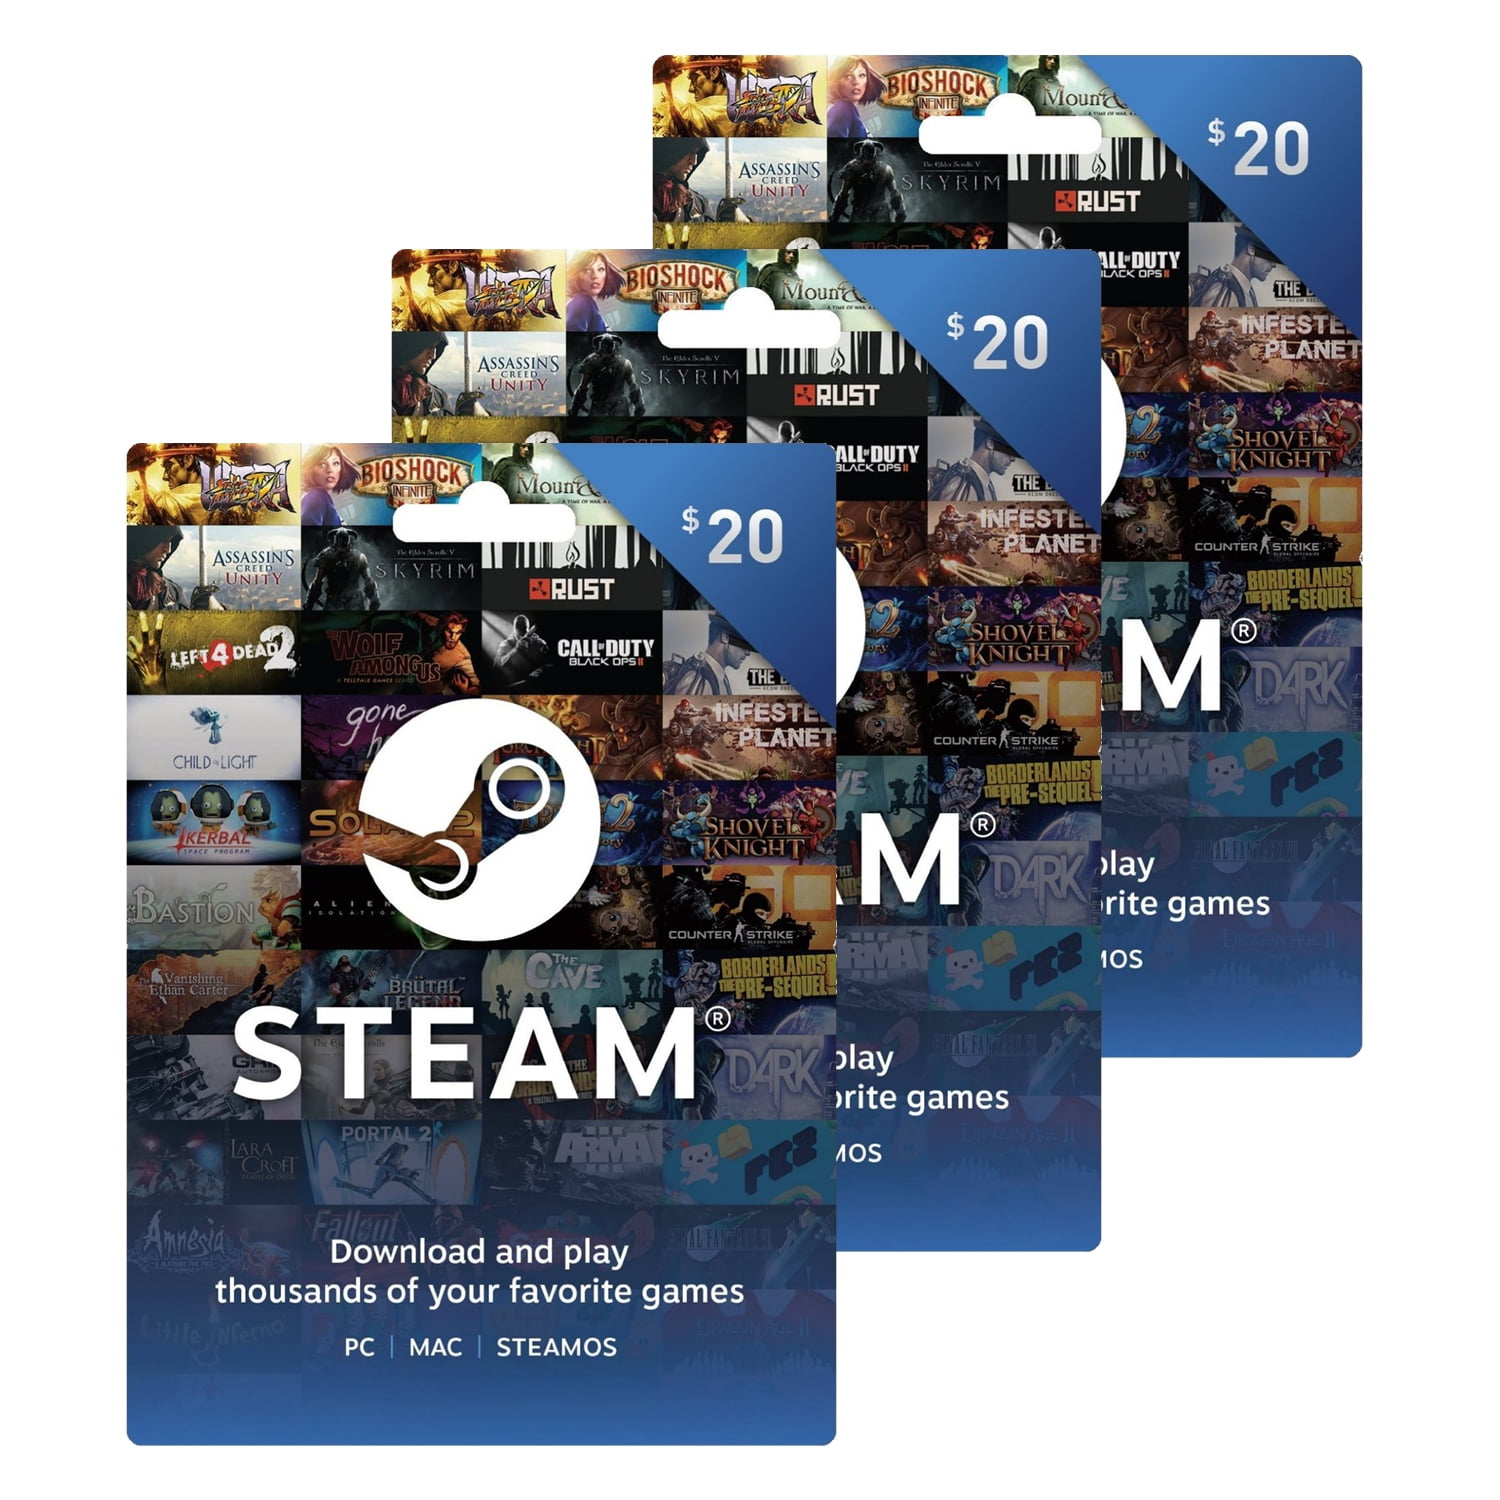 Steam $60.00 Physical Gift Cards (3 pack of $20.00 Cards), Valve